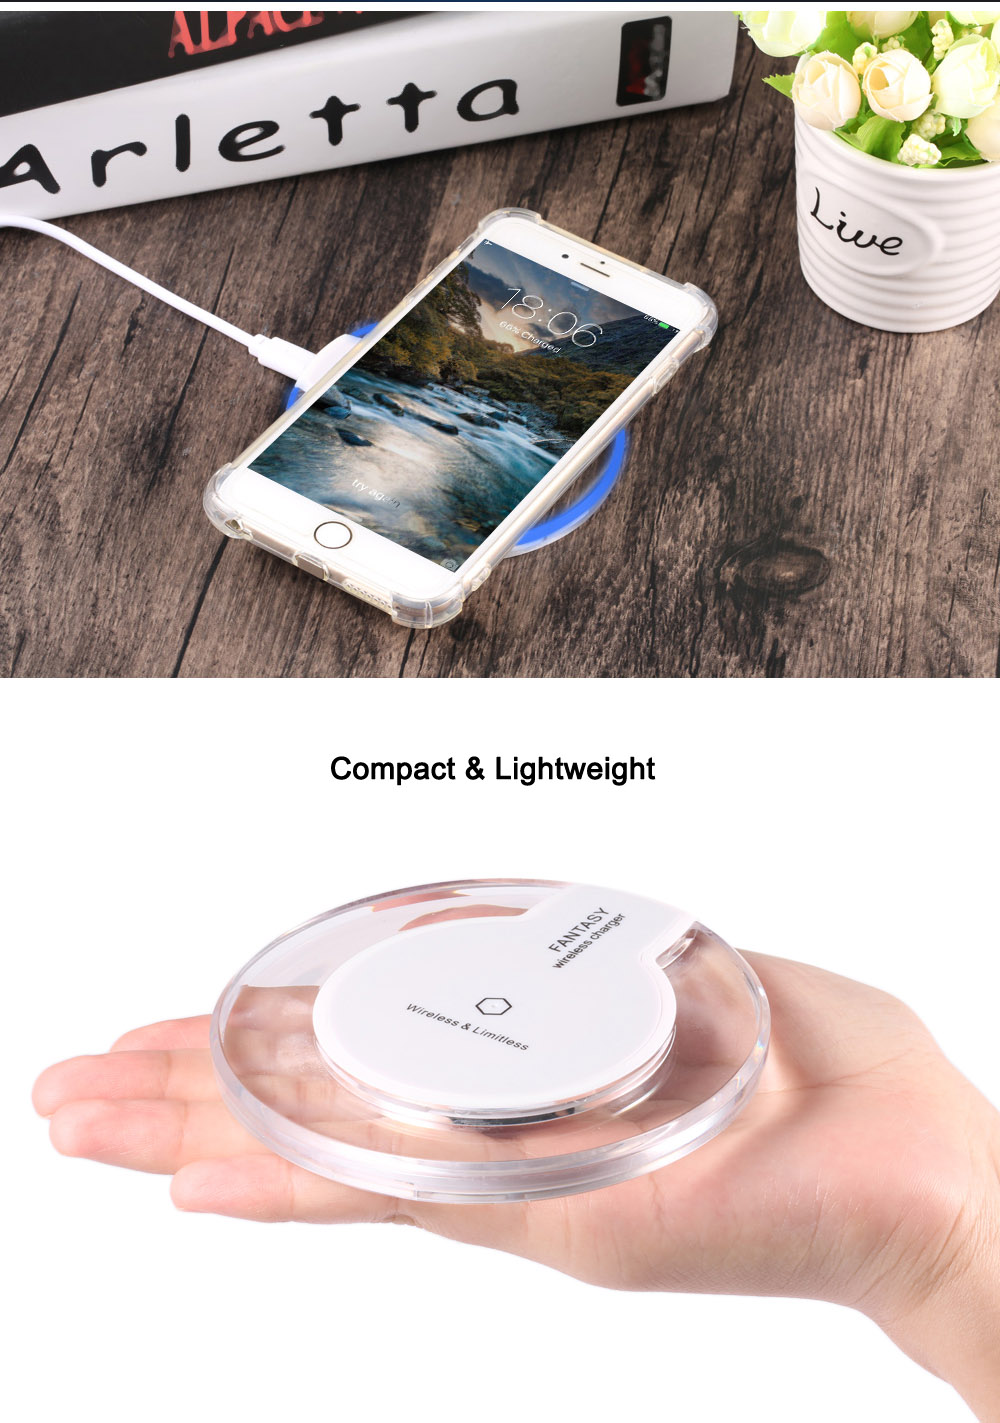 Crystal Clear Qi Wireless Charger + Charging Receiver + Transparent Protection Case for iPhone 6 Plus / 6S Plus